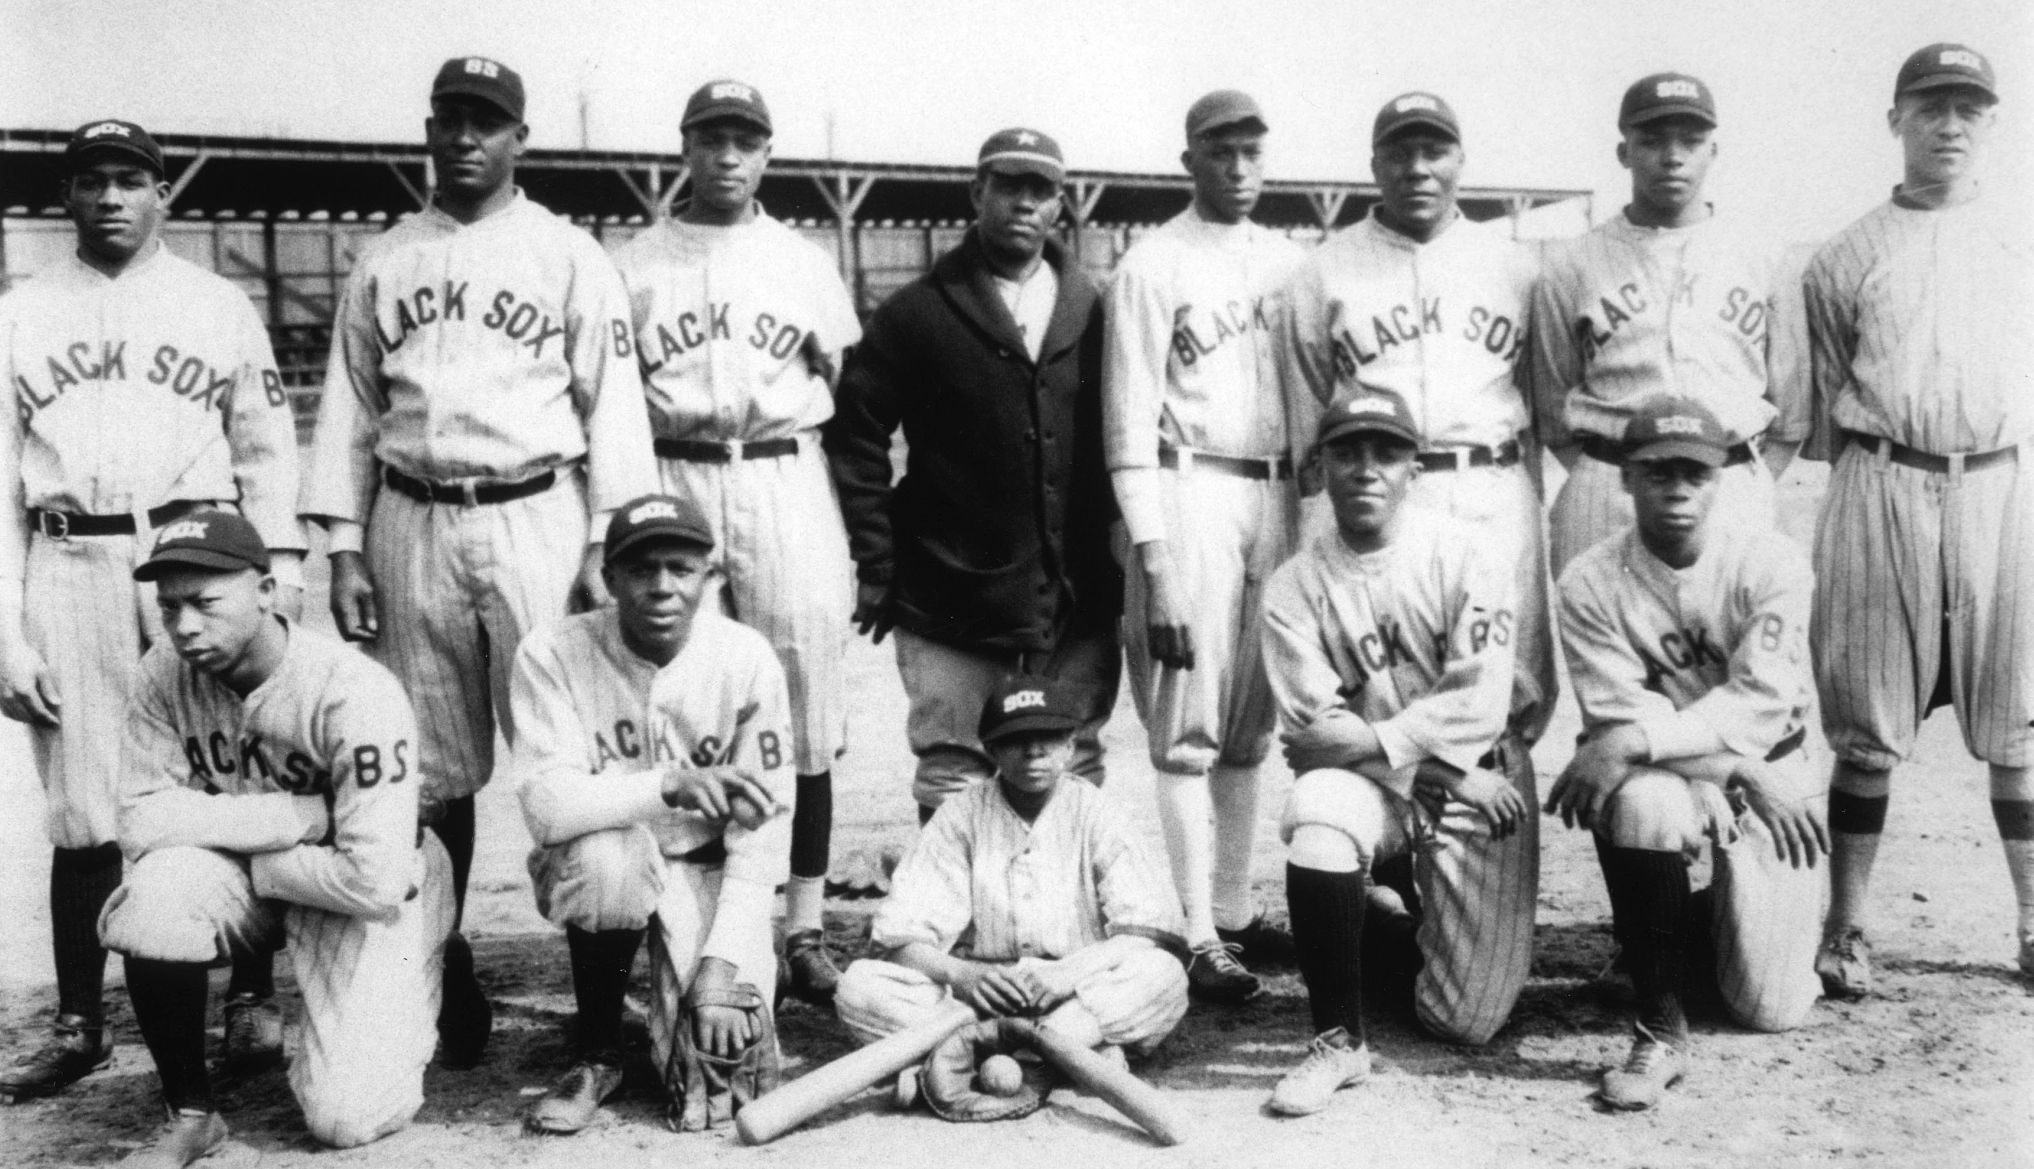 the baltimore black sox baseball team poses for a portrait during the 1925 season